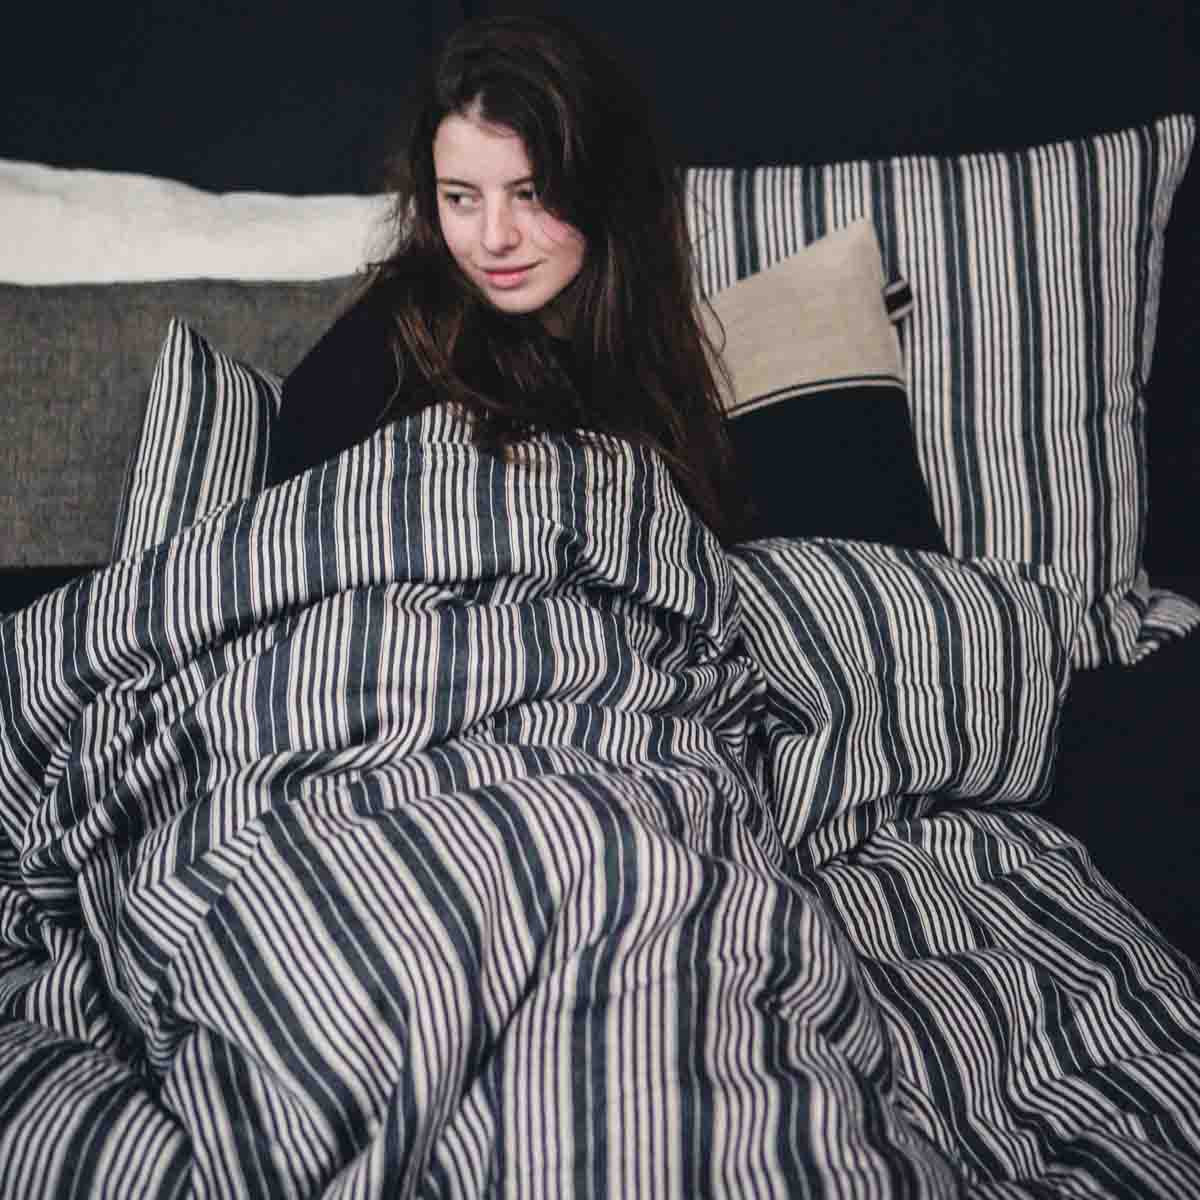 The Tack Stripe washed linen duvet cover - Libeco